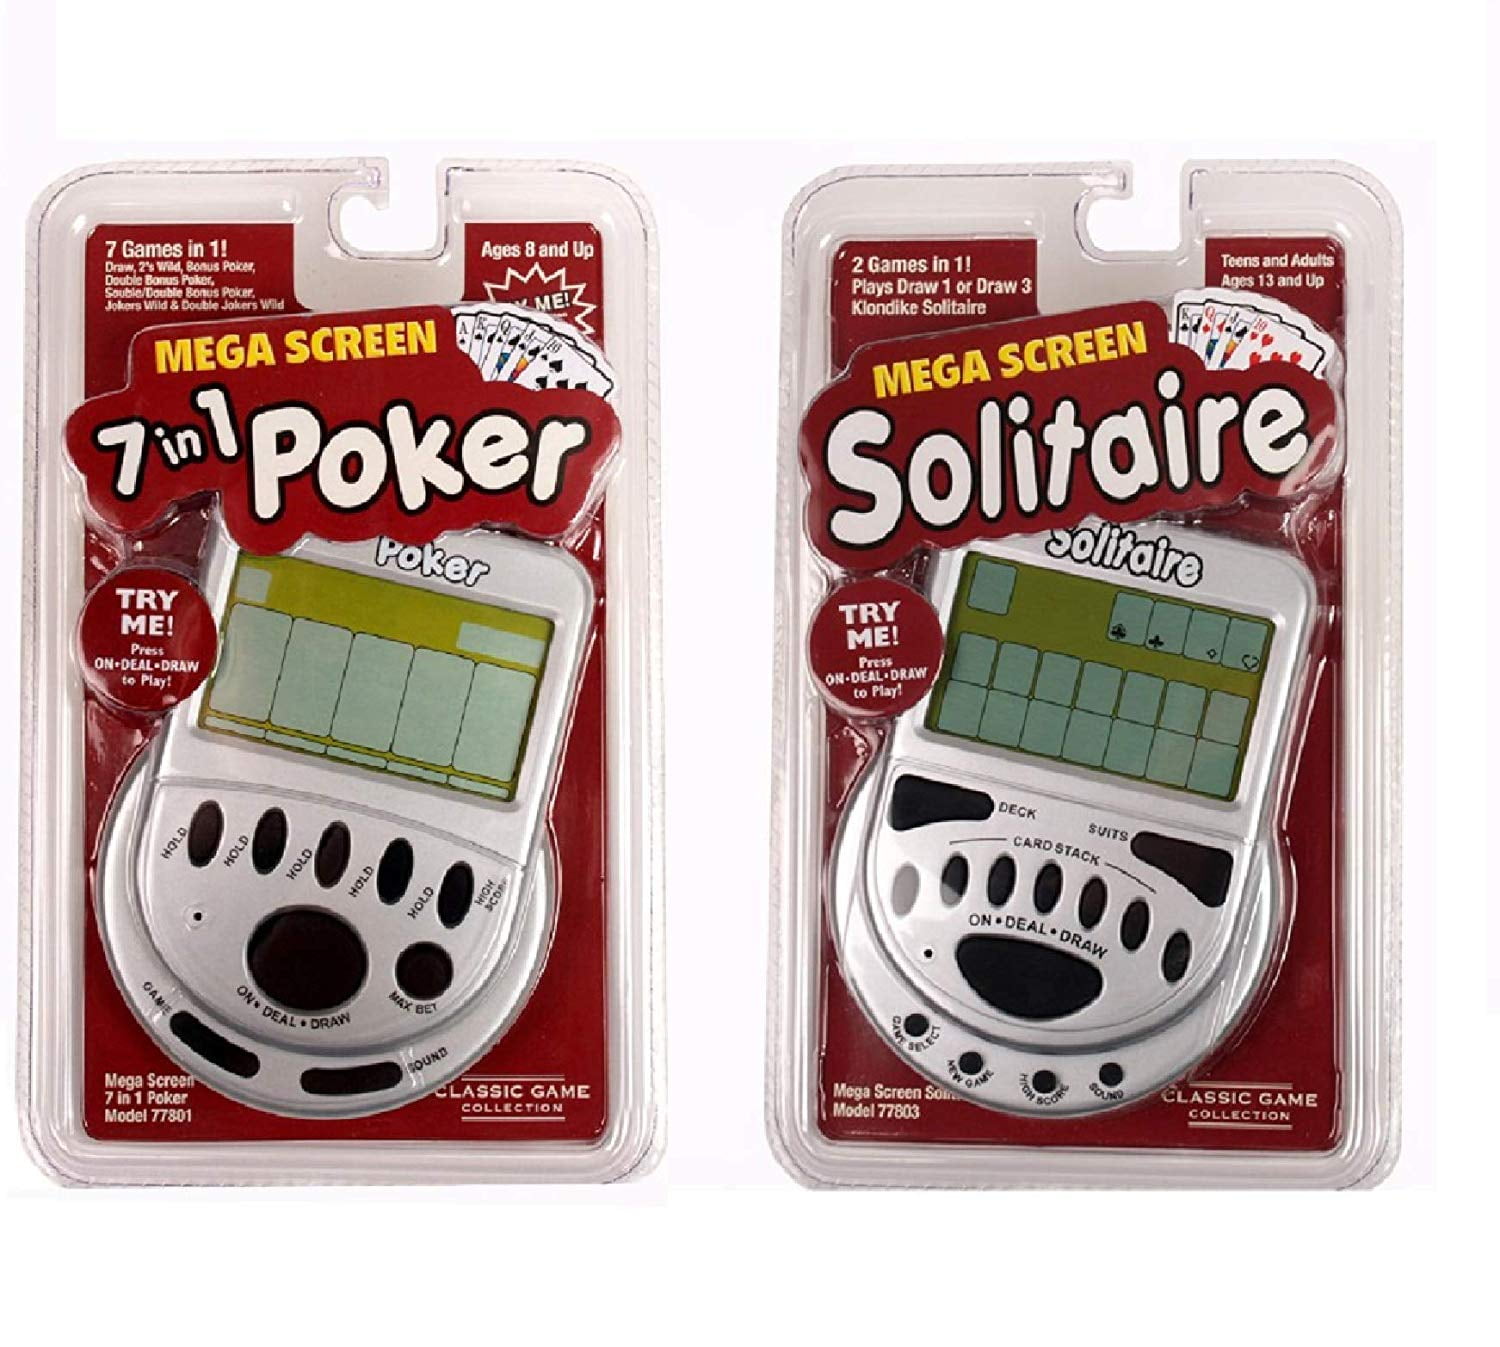 Solitaire Draw 1 or 3 Handheld Electronic Arcade Travel Game Kid Game Screen Toy 